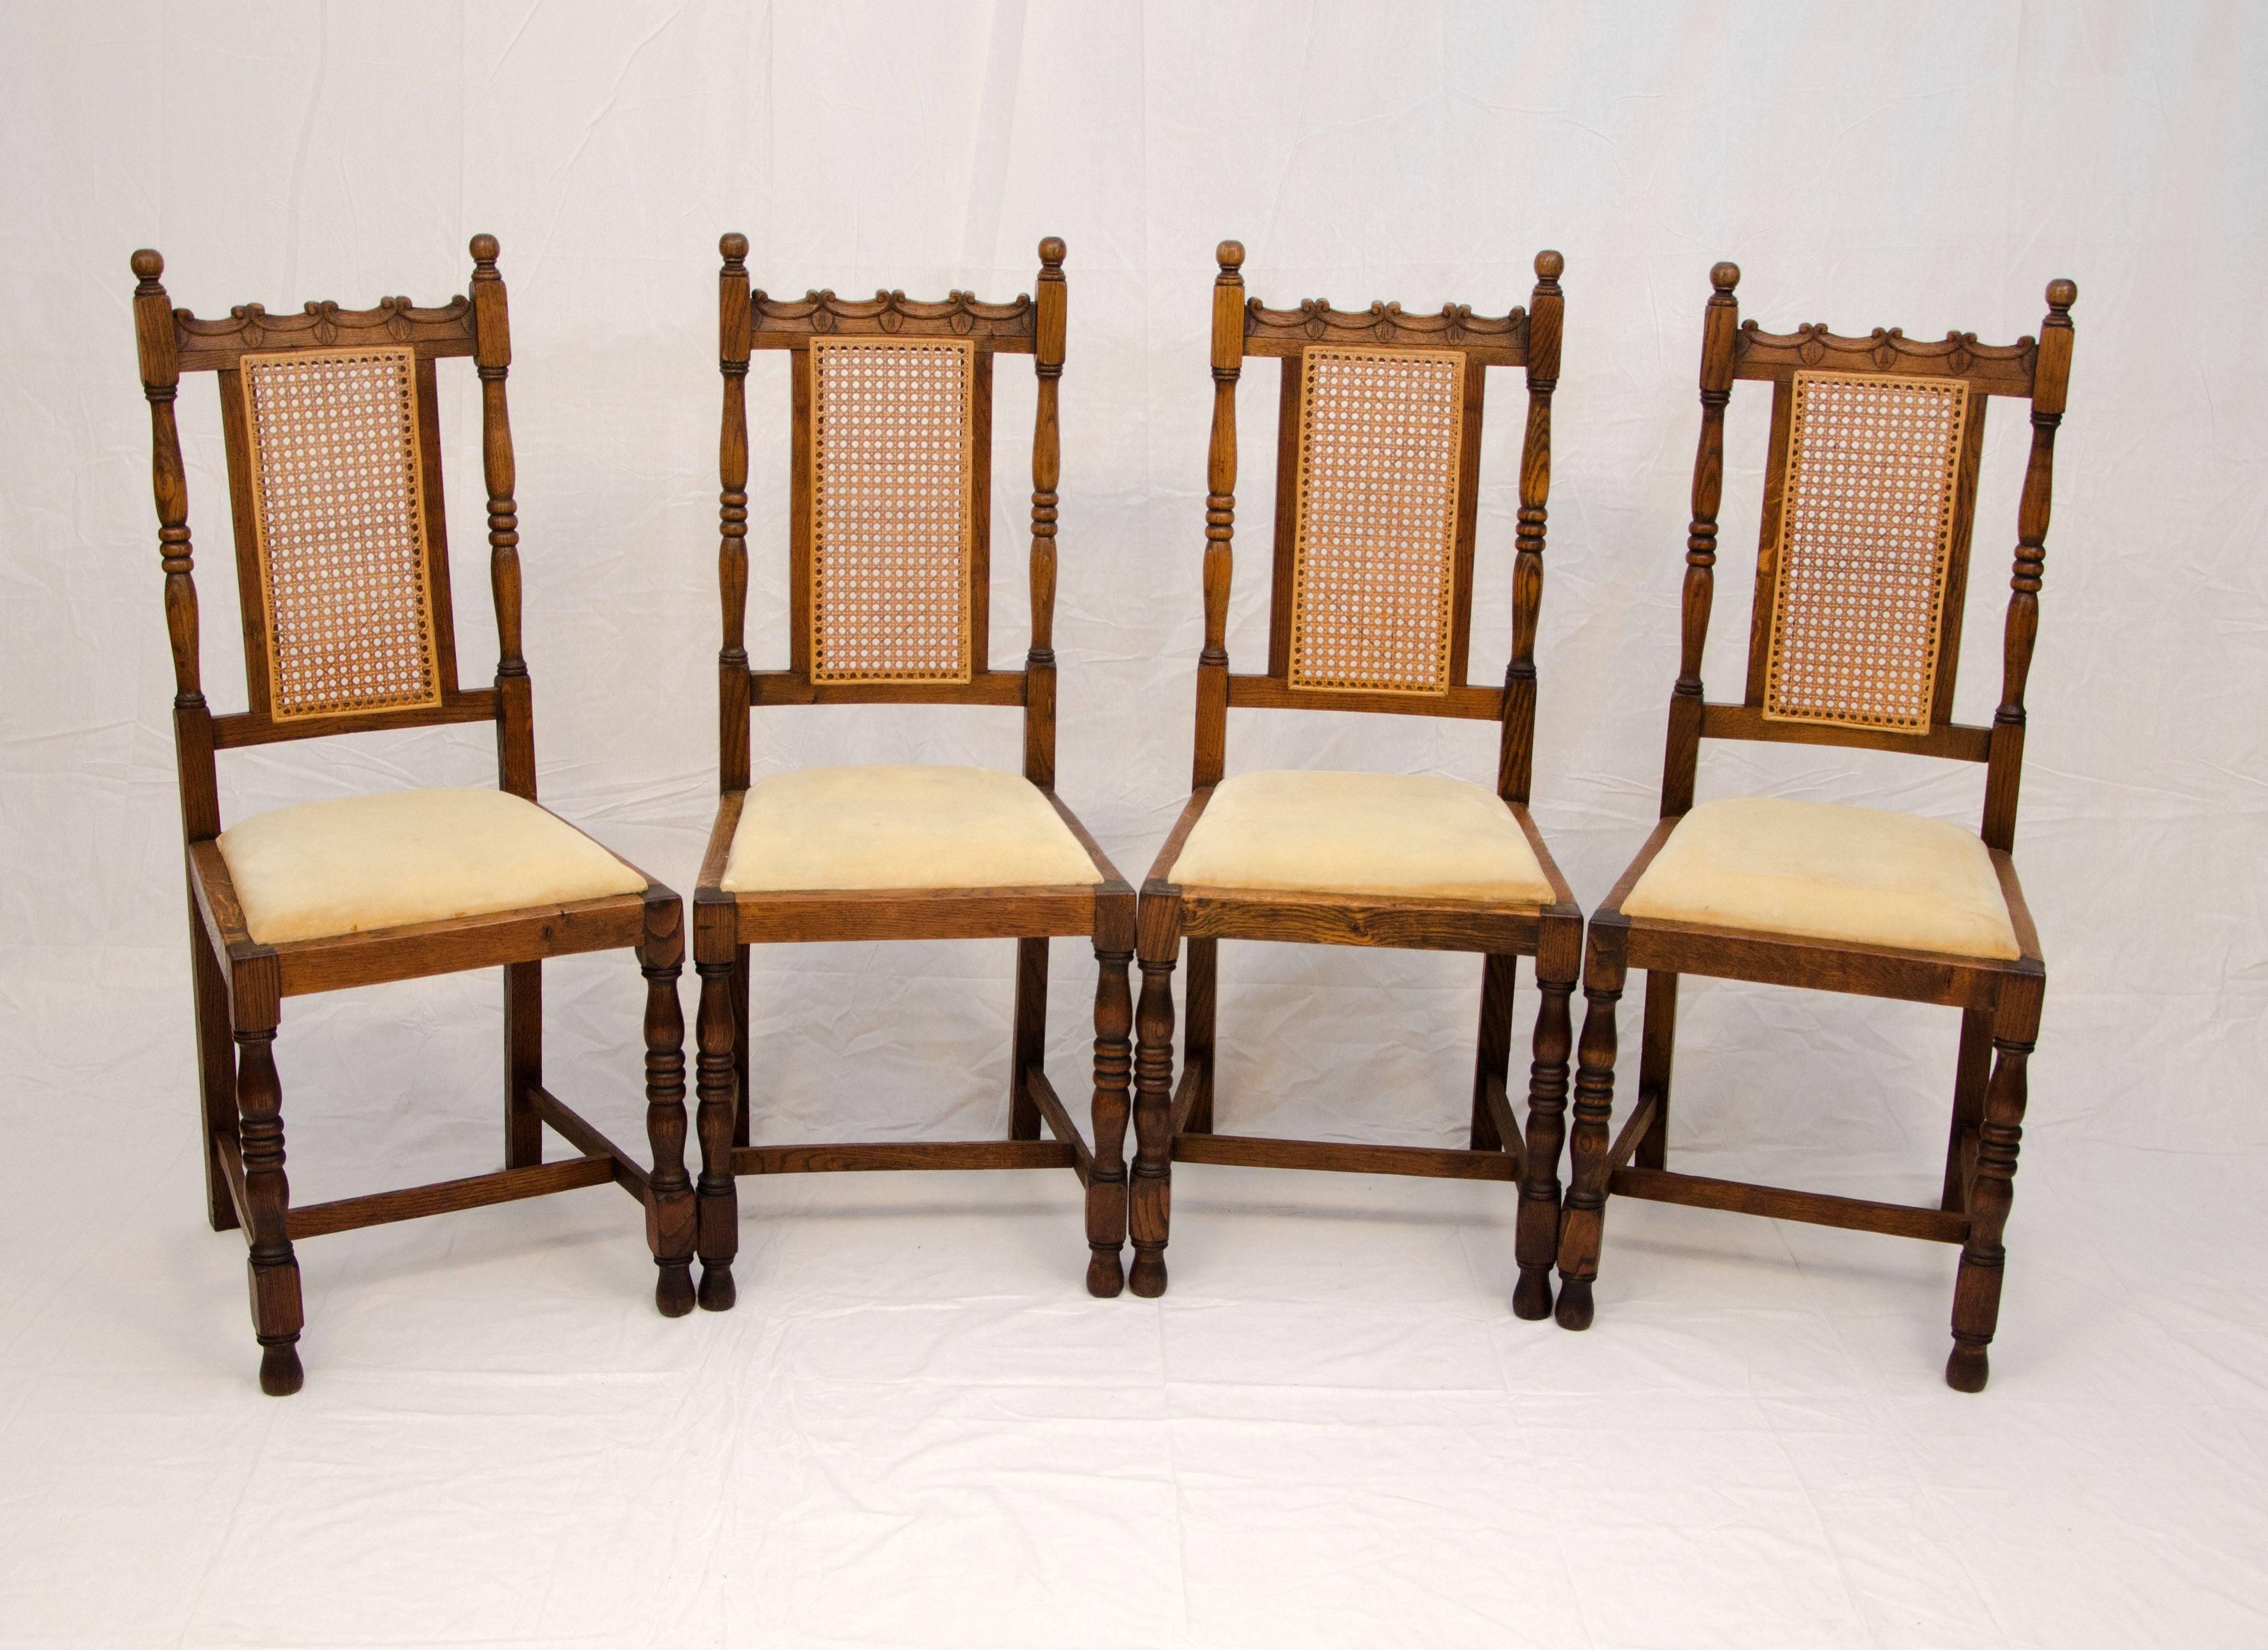 Good looking set of four antique English oak dining chairs with turned legs and accented by a cane back. These chairs were originally hand caned but were restored with sheet cane and spline, a spline is also attached to the backs to cover original